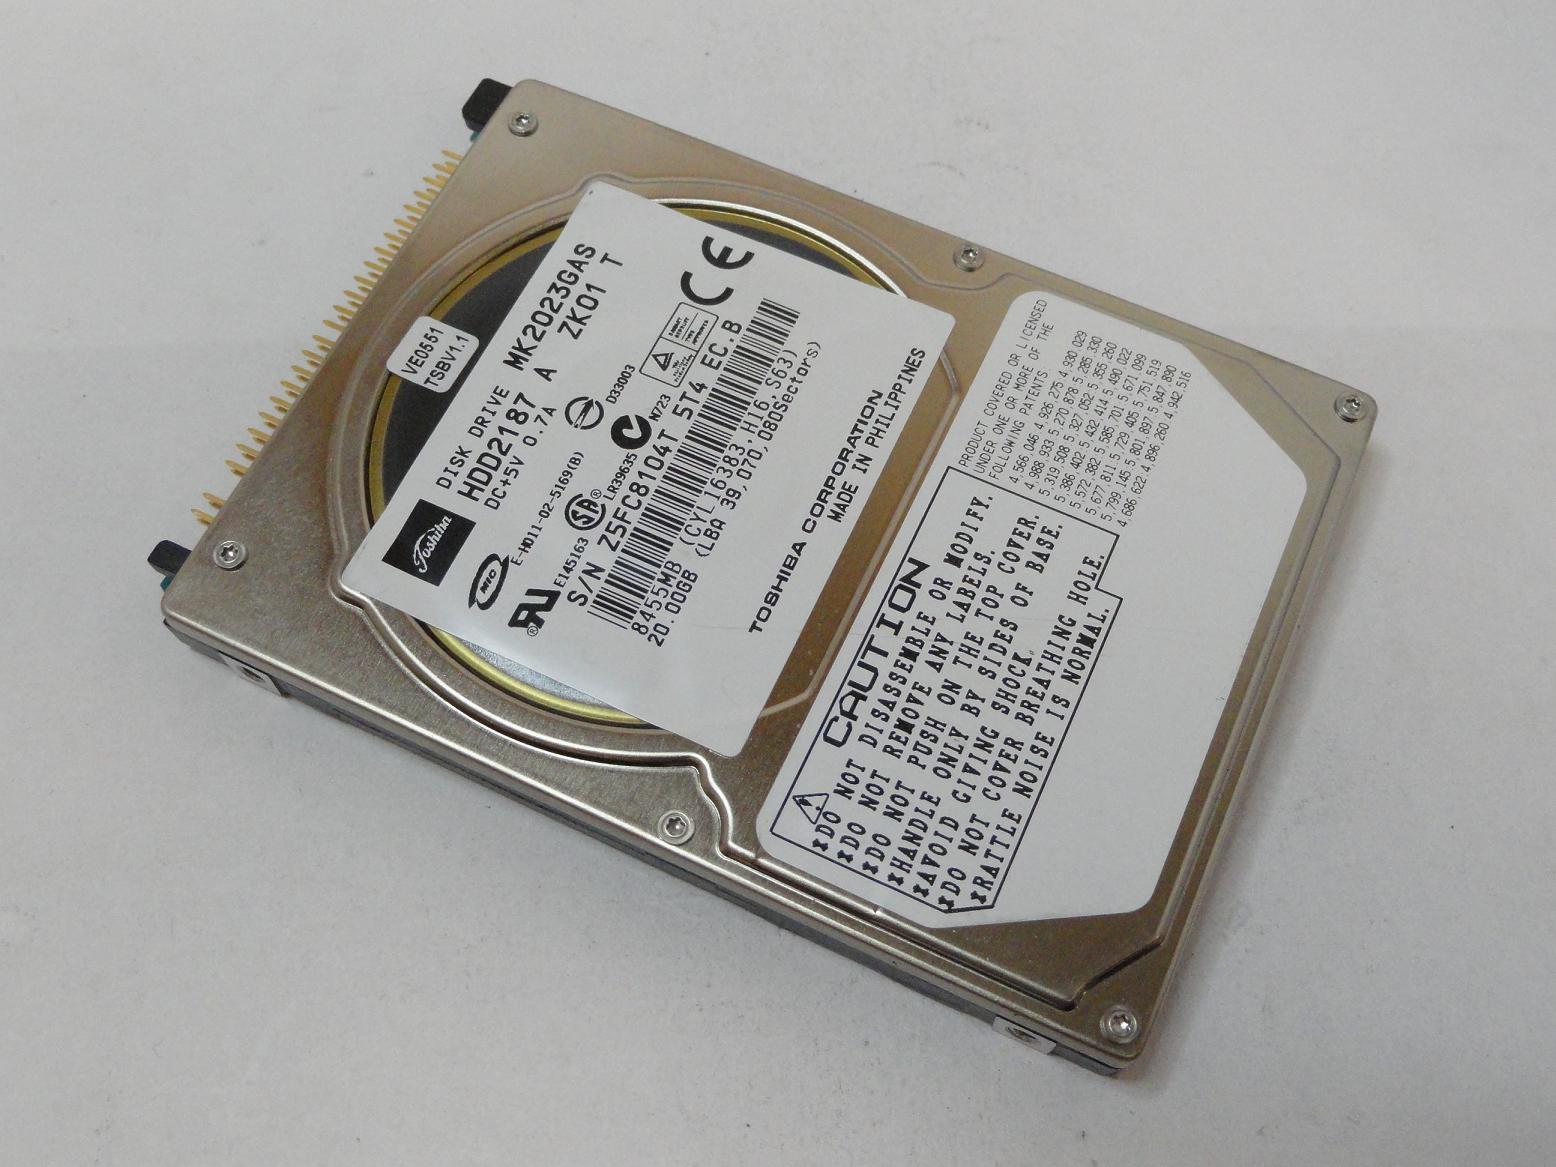 HDD2187 - Toshiba HP 20GB IDE 5400rpm 3.5in Laptop HDD - USED